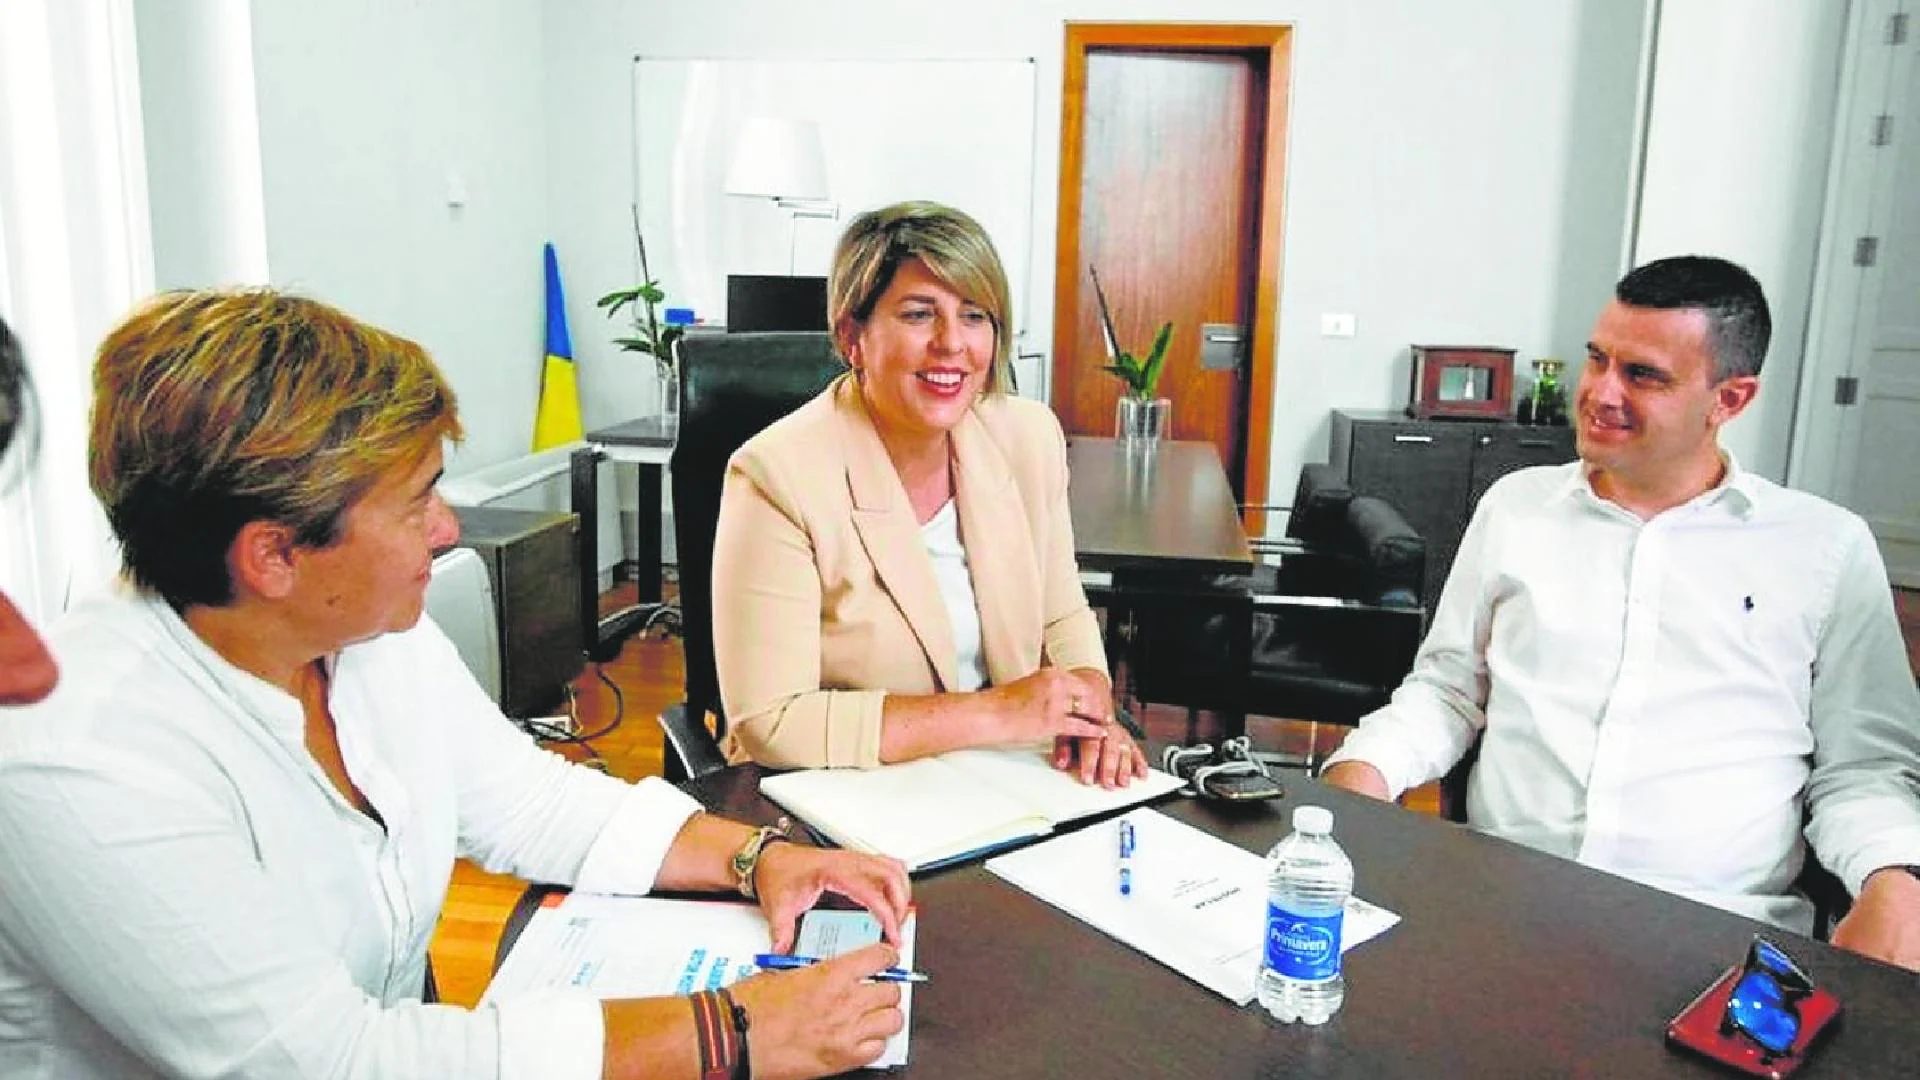 Arroyo offers the ADLE to hoteliers to improve their training